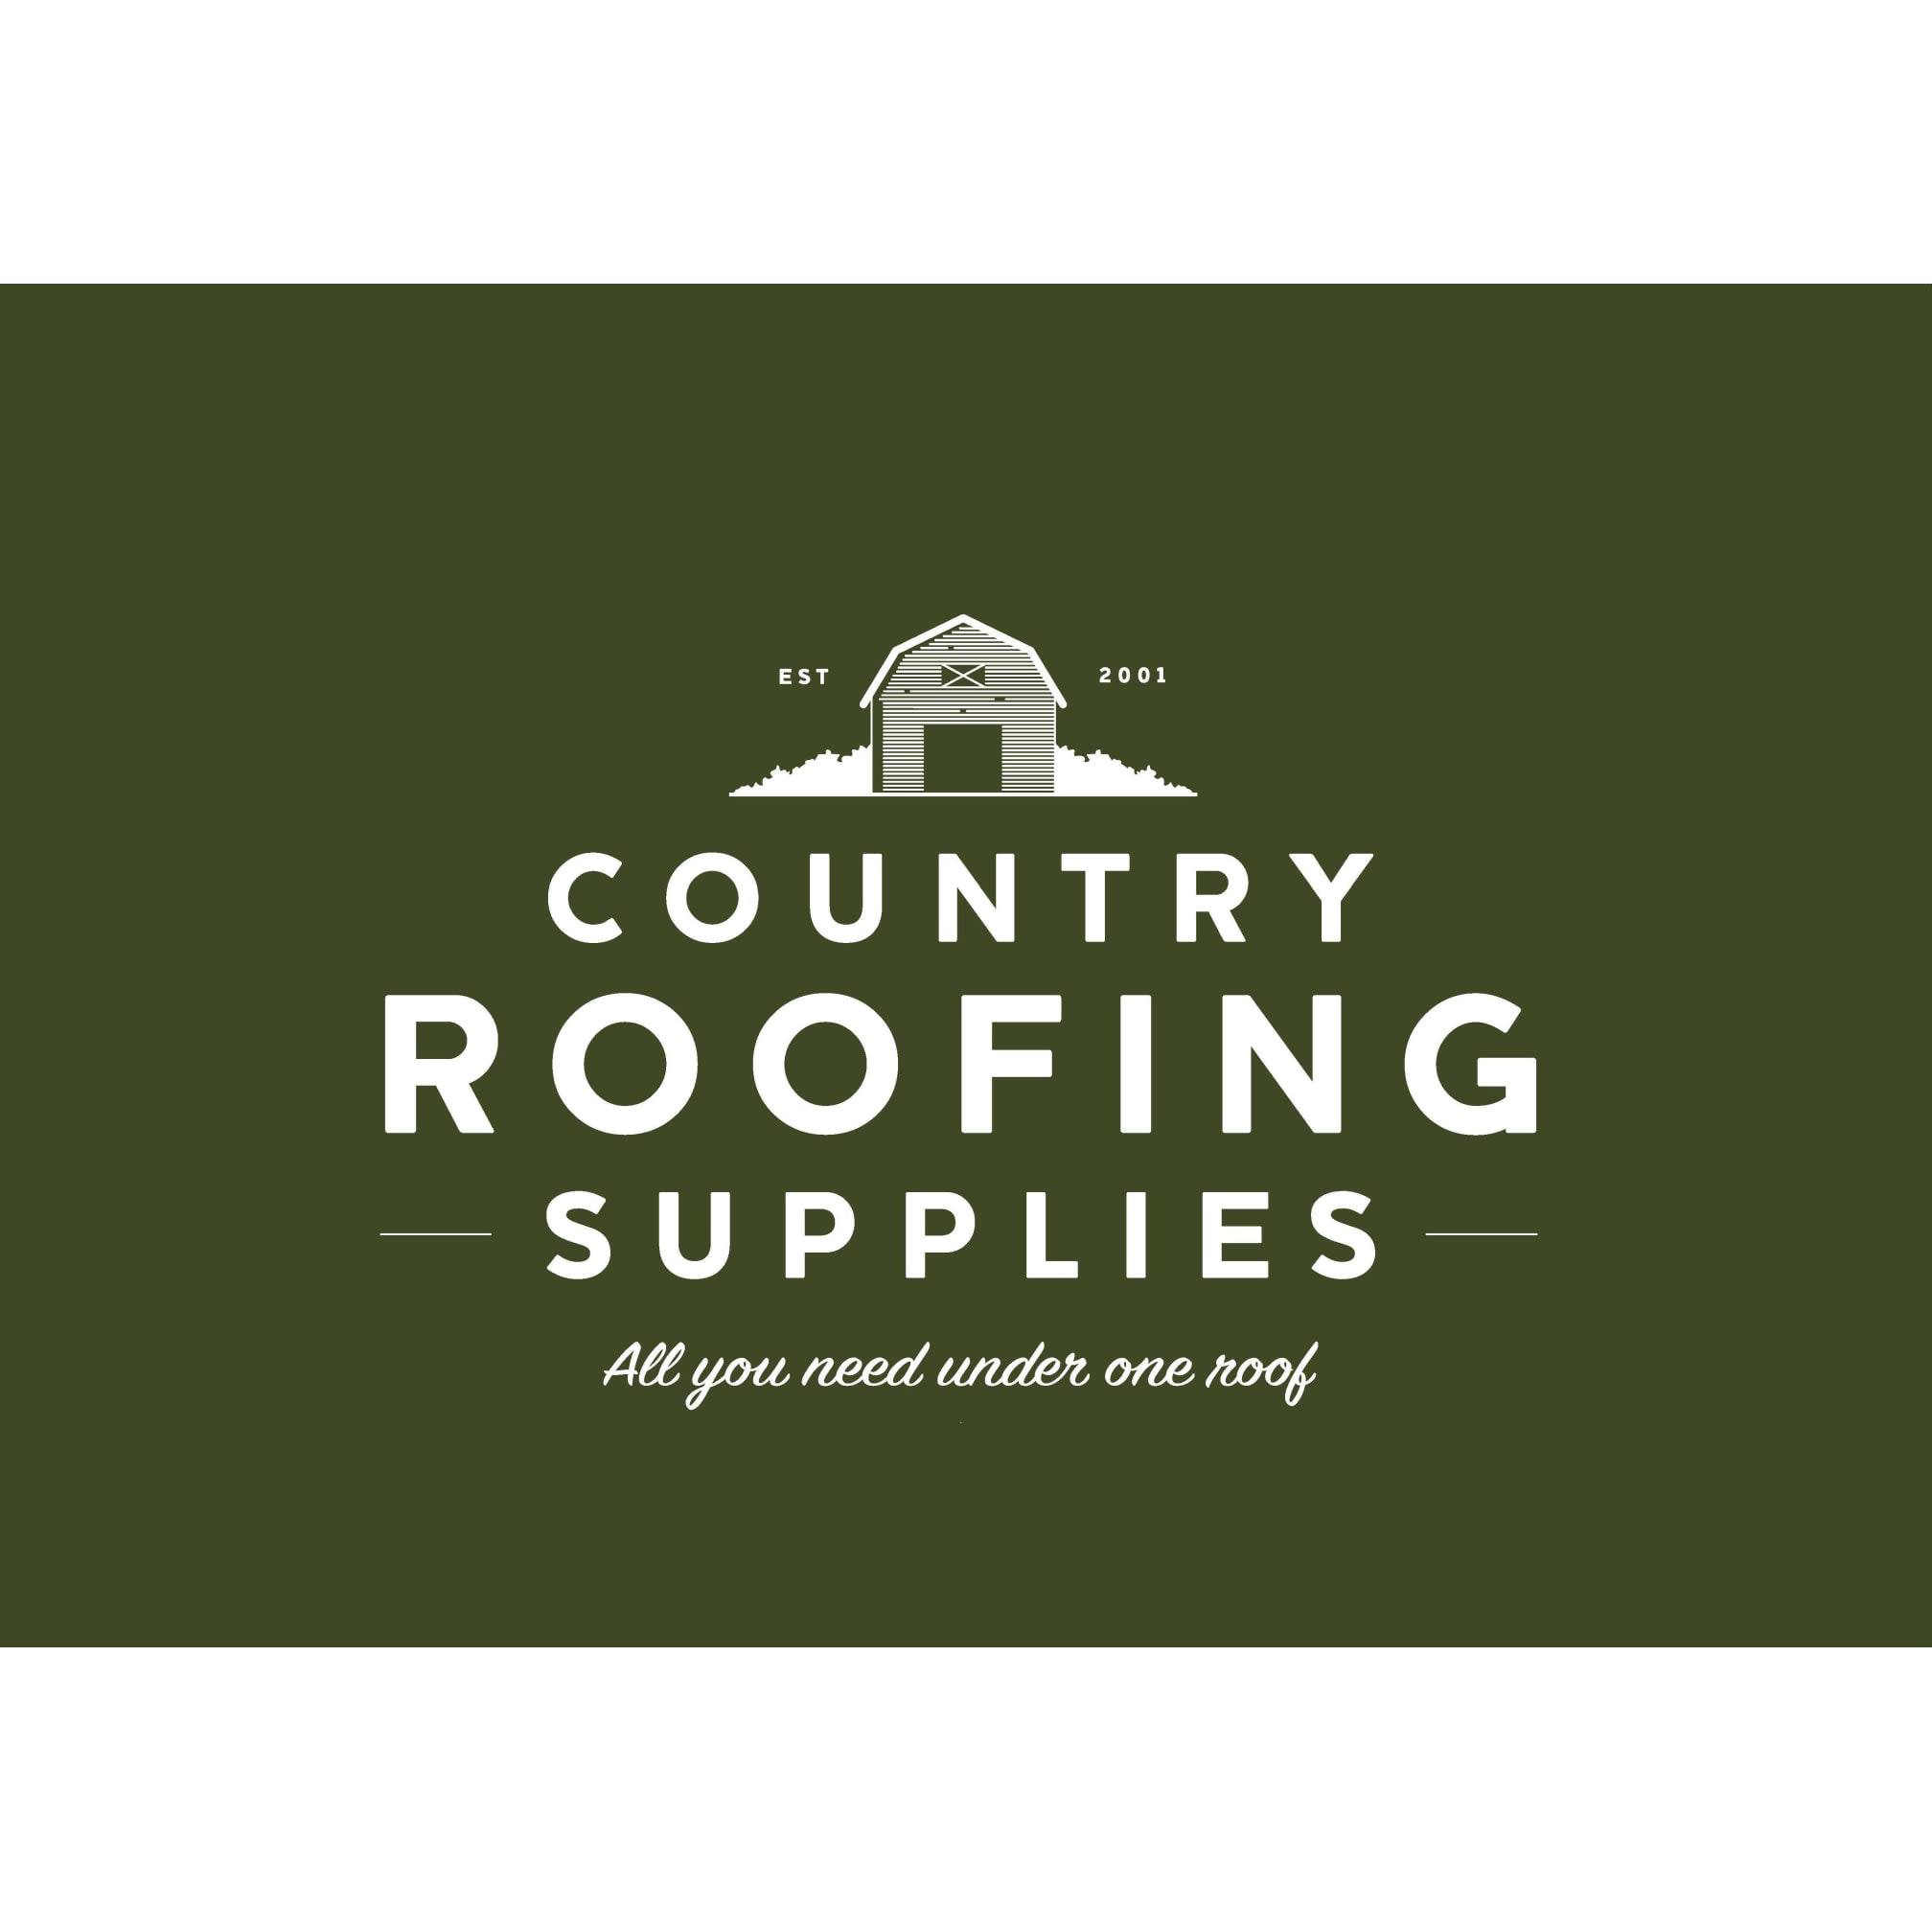 LOGO Country Roofing Supplies (2001) Ltd Henley-On-Thames 01491 641024